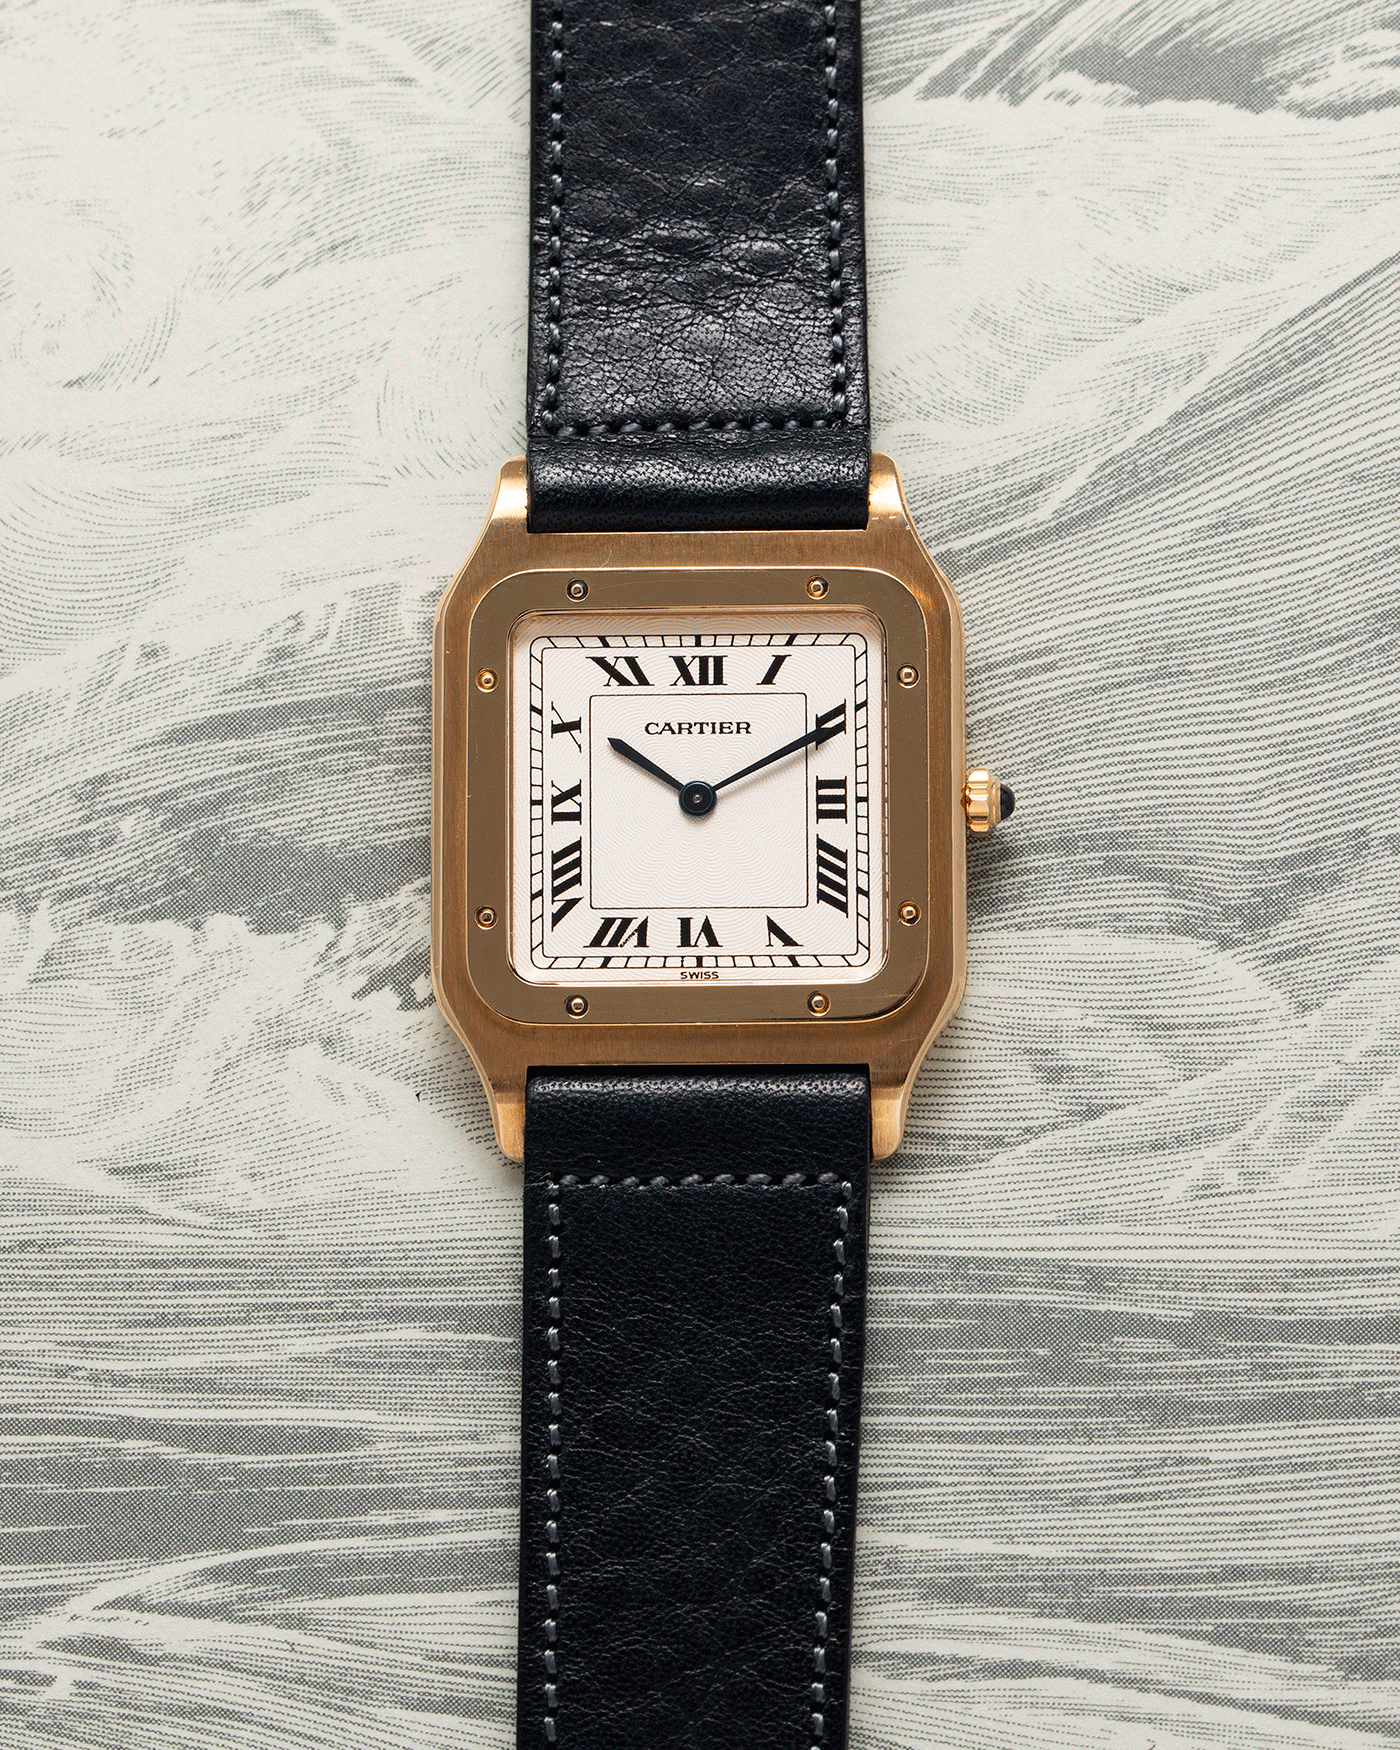 Brand: Cartier Year: 1990s Model: Santos Dumont Reference: 1576 Material: 18k Yellow Gold Movement: F.Piguet 21 Case Diameter: 27mm Strap: Accurate Form Navy Blue Japanese Calf and 18k Yellow Gold Cartier Deployant